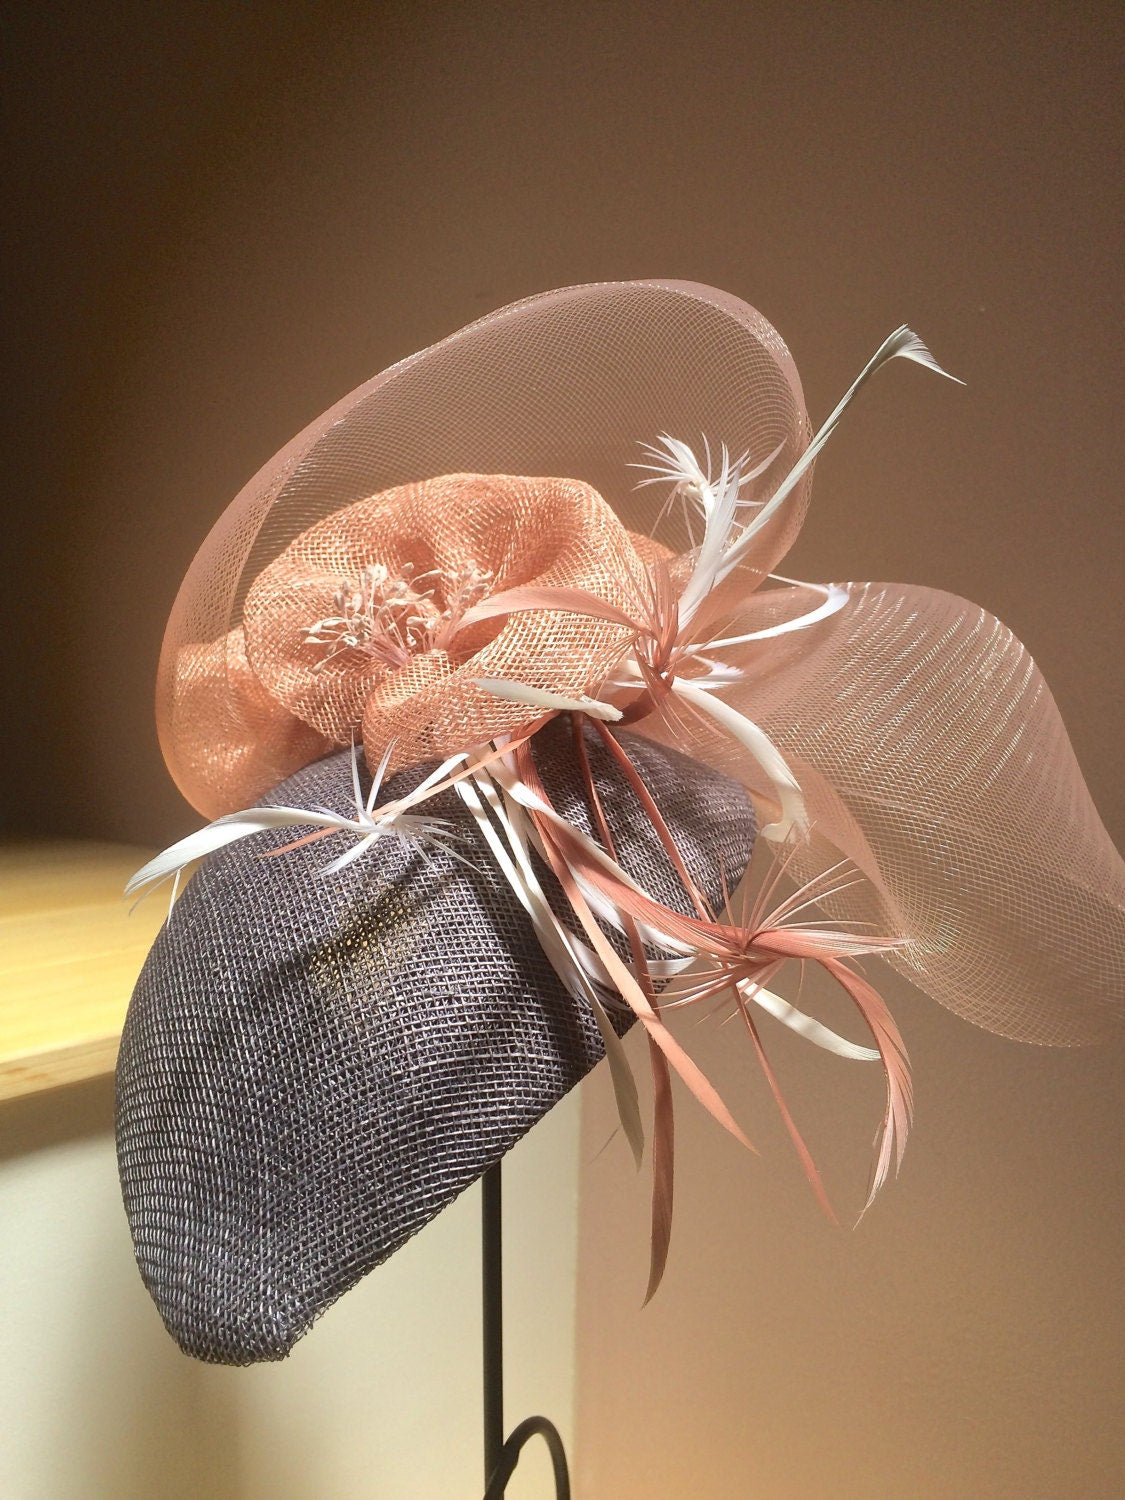 Mother of the Bride hat, Fascinator in grey and Peach with feathers--Bridal hat-Races Hat-Church Hat-Cocktail Hat, Royal Ascot, Derby hat!